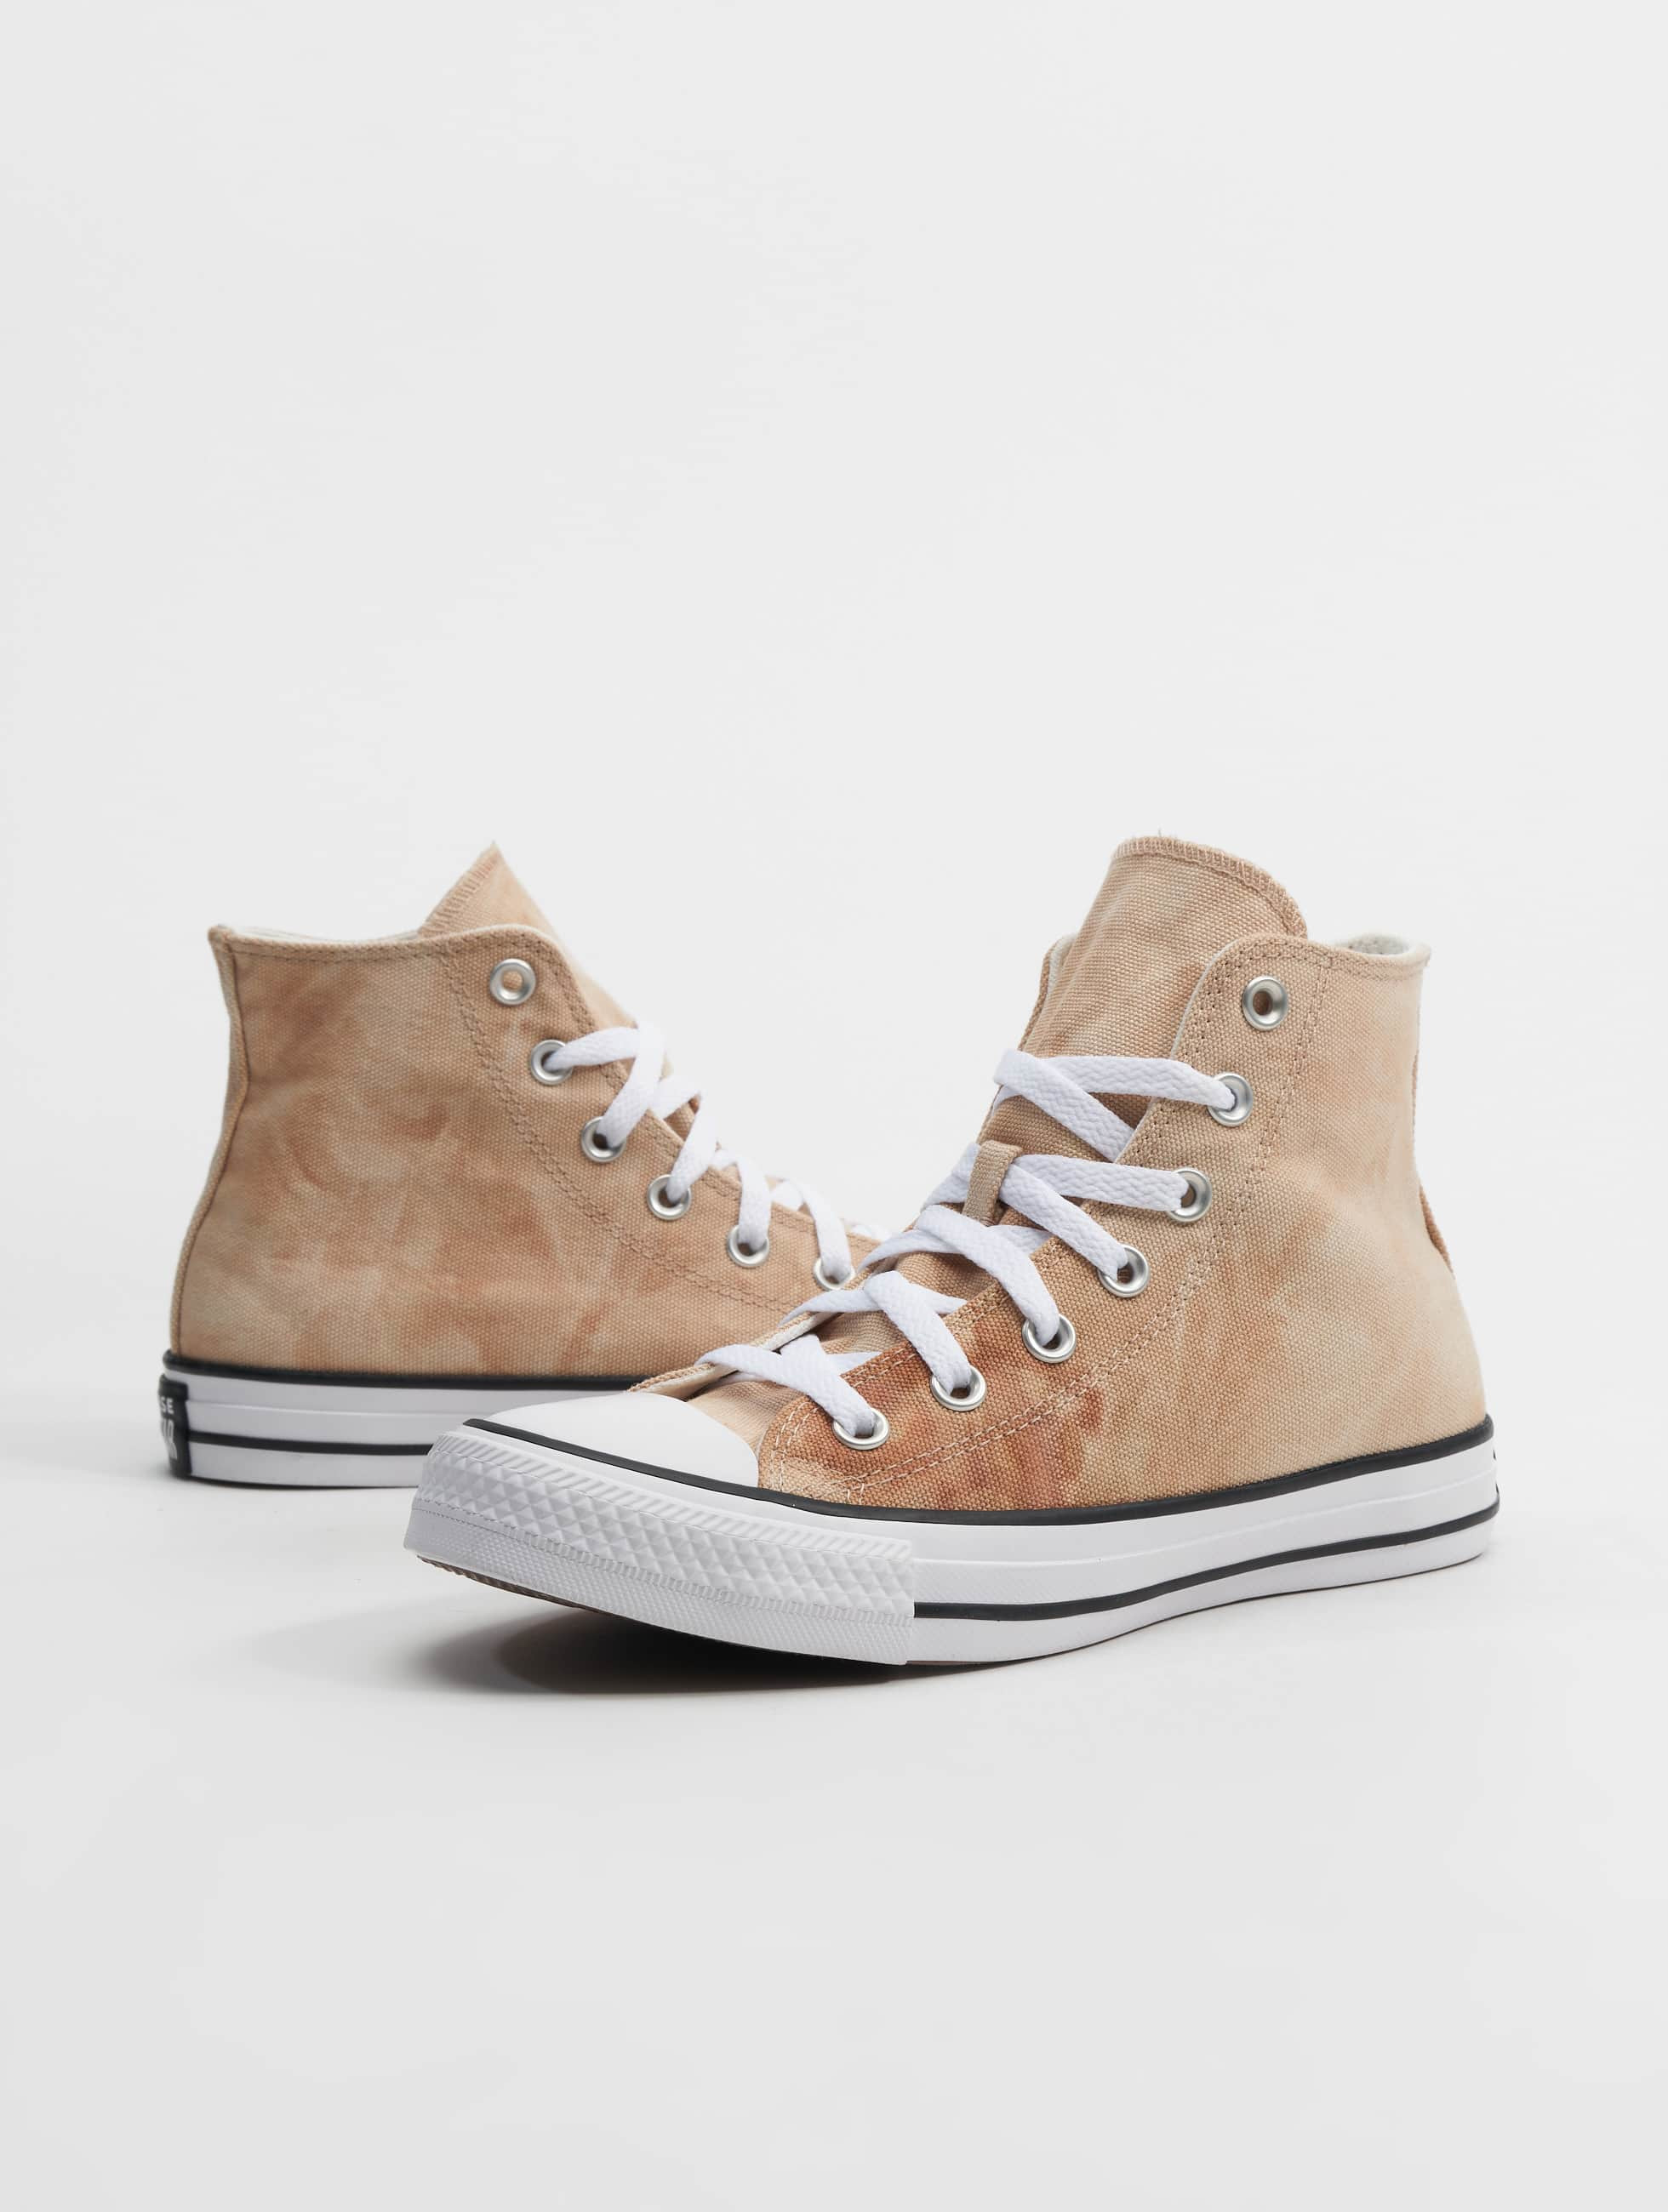 Converse Sko Sneakers Chuck All Star Washed i beige 1023850